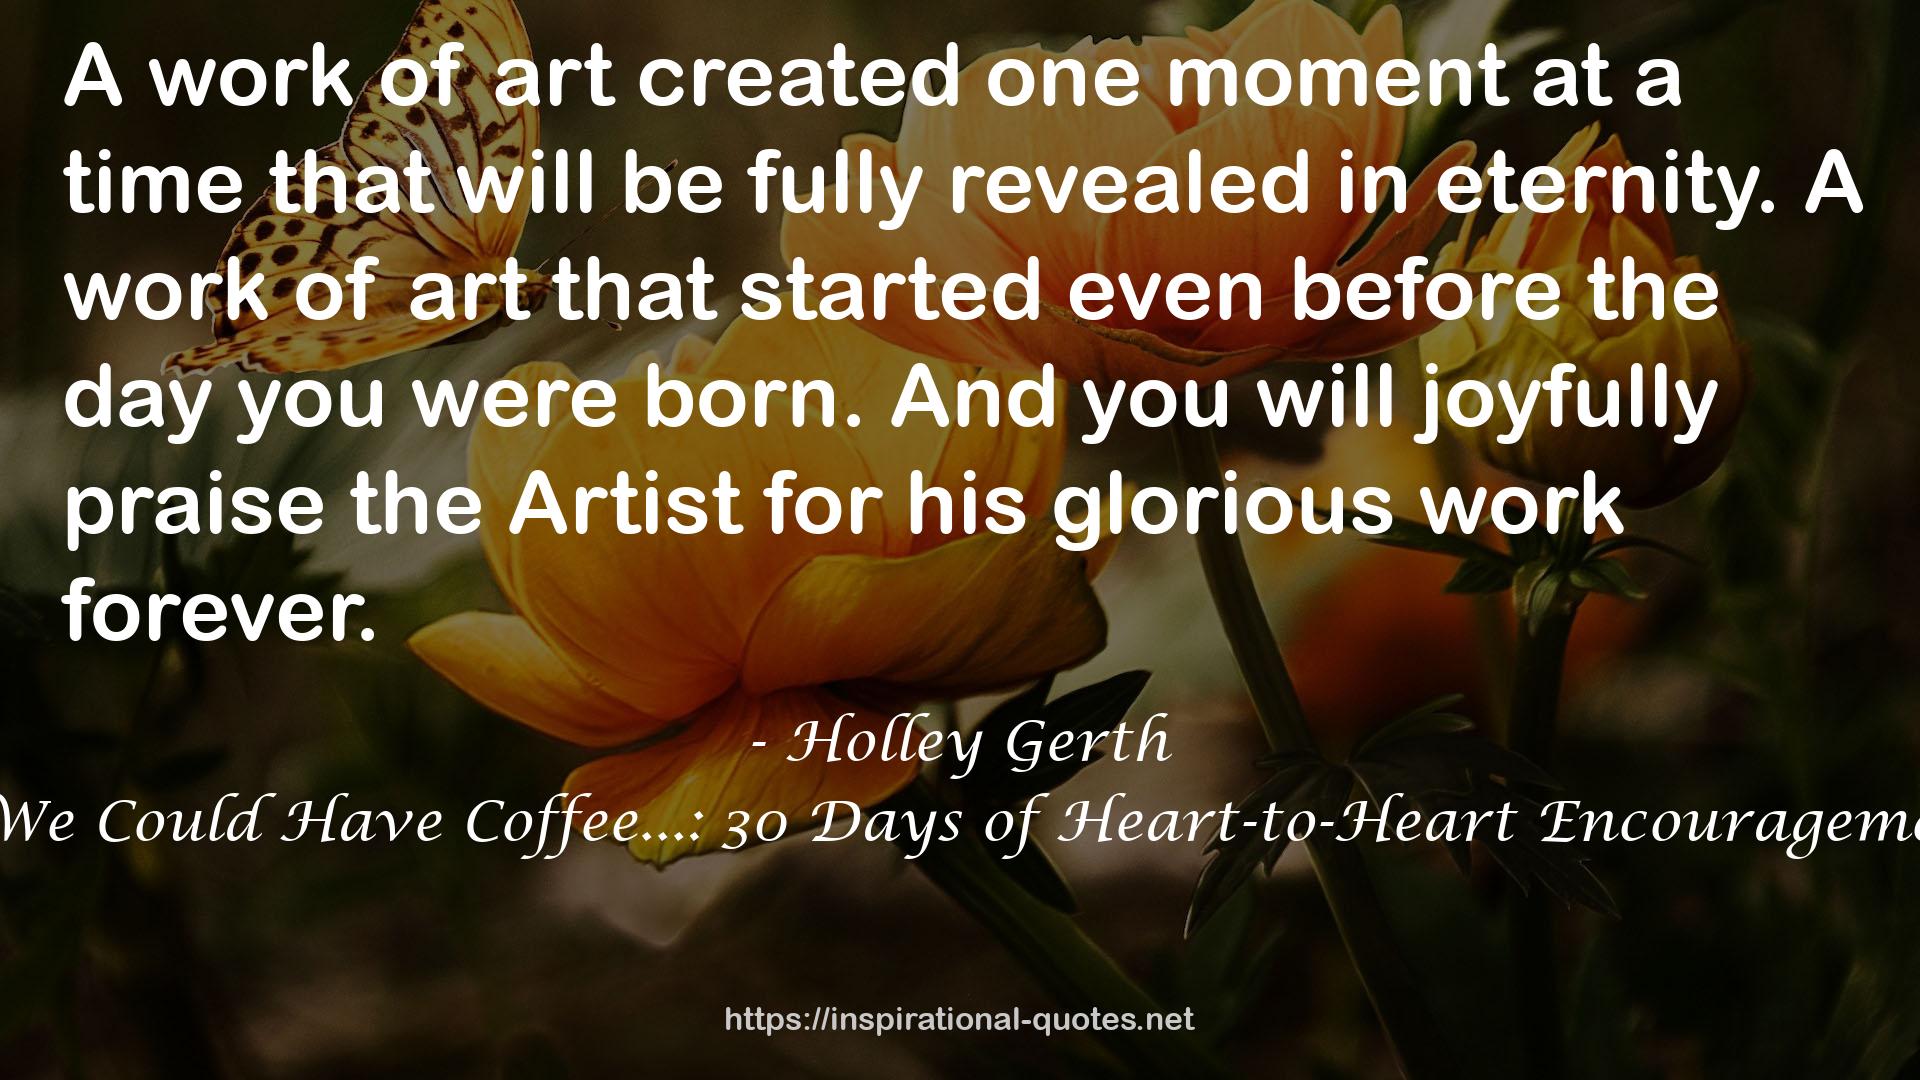 If We Could Have Coffee...: 30 Days of Heart-to-Heart Encouragement QUOTES